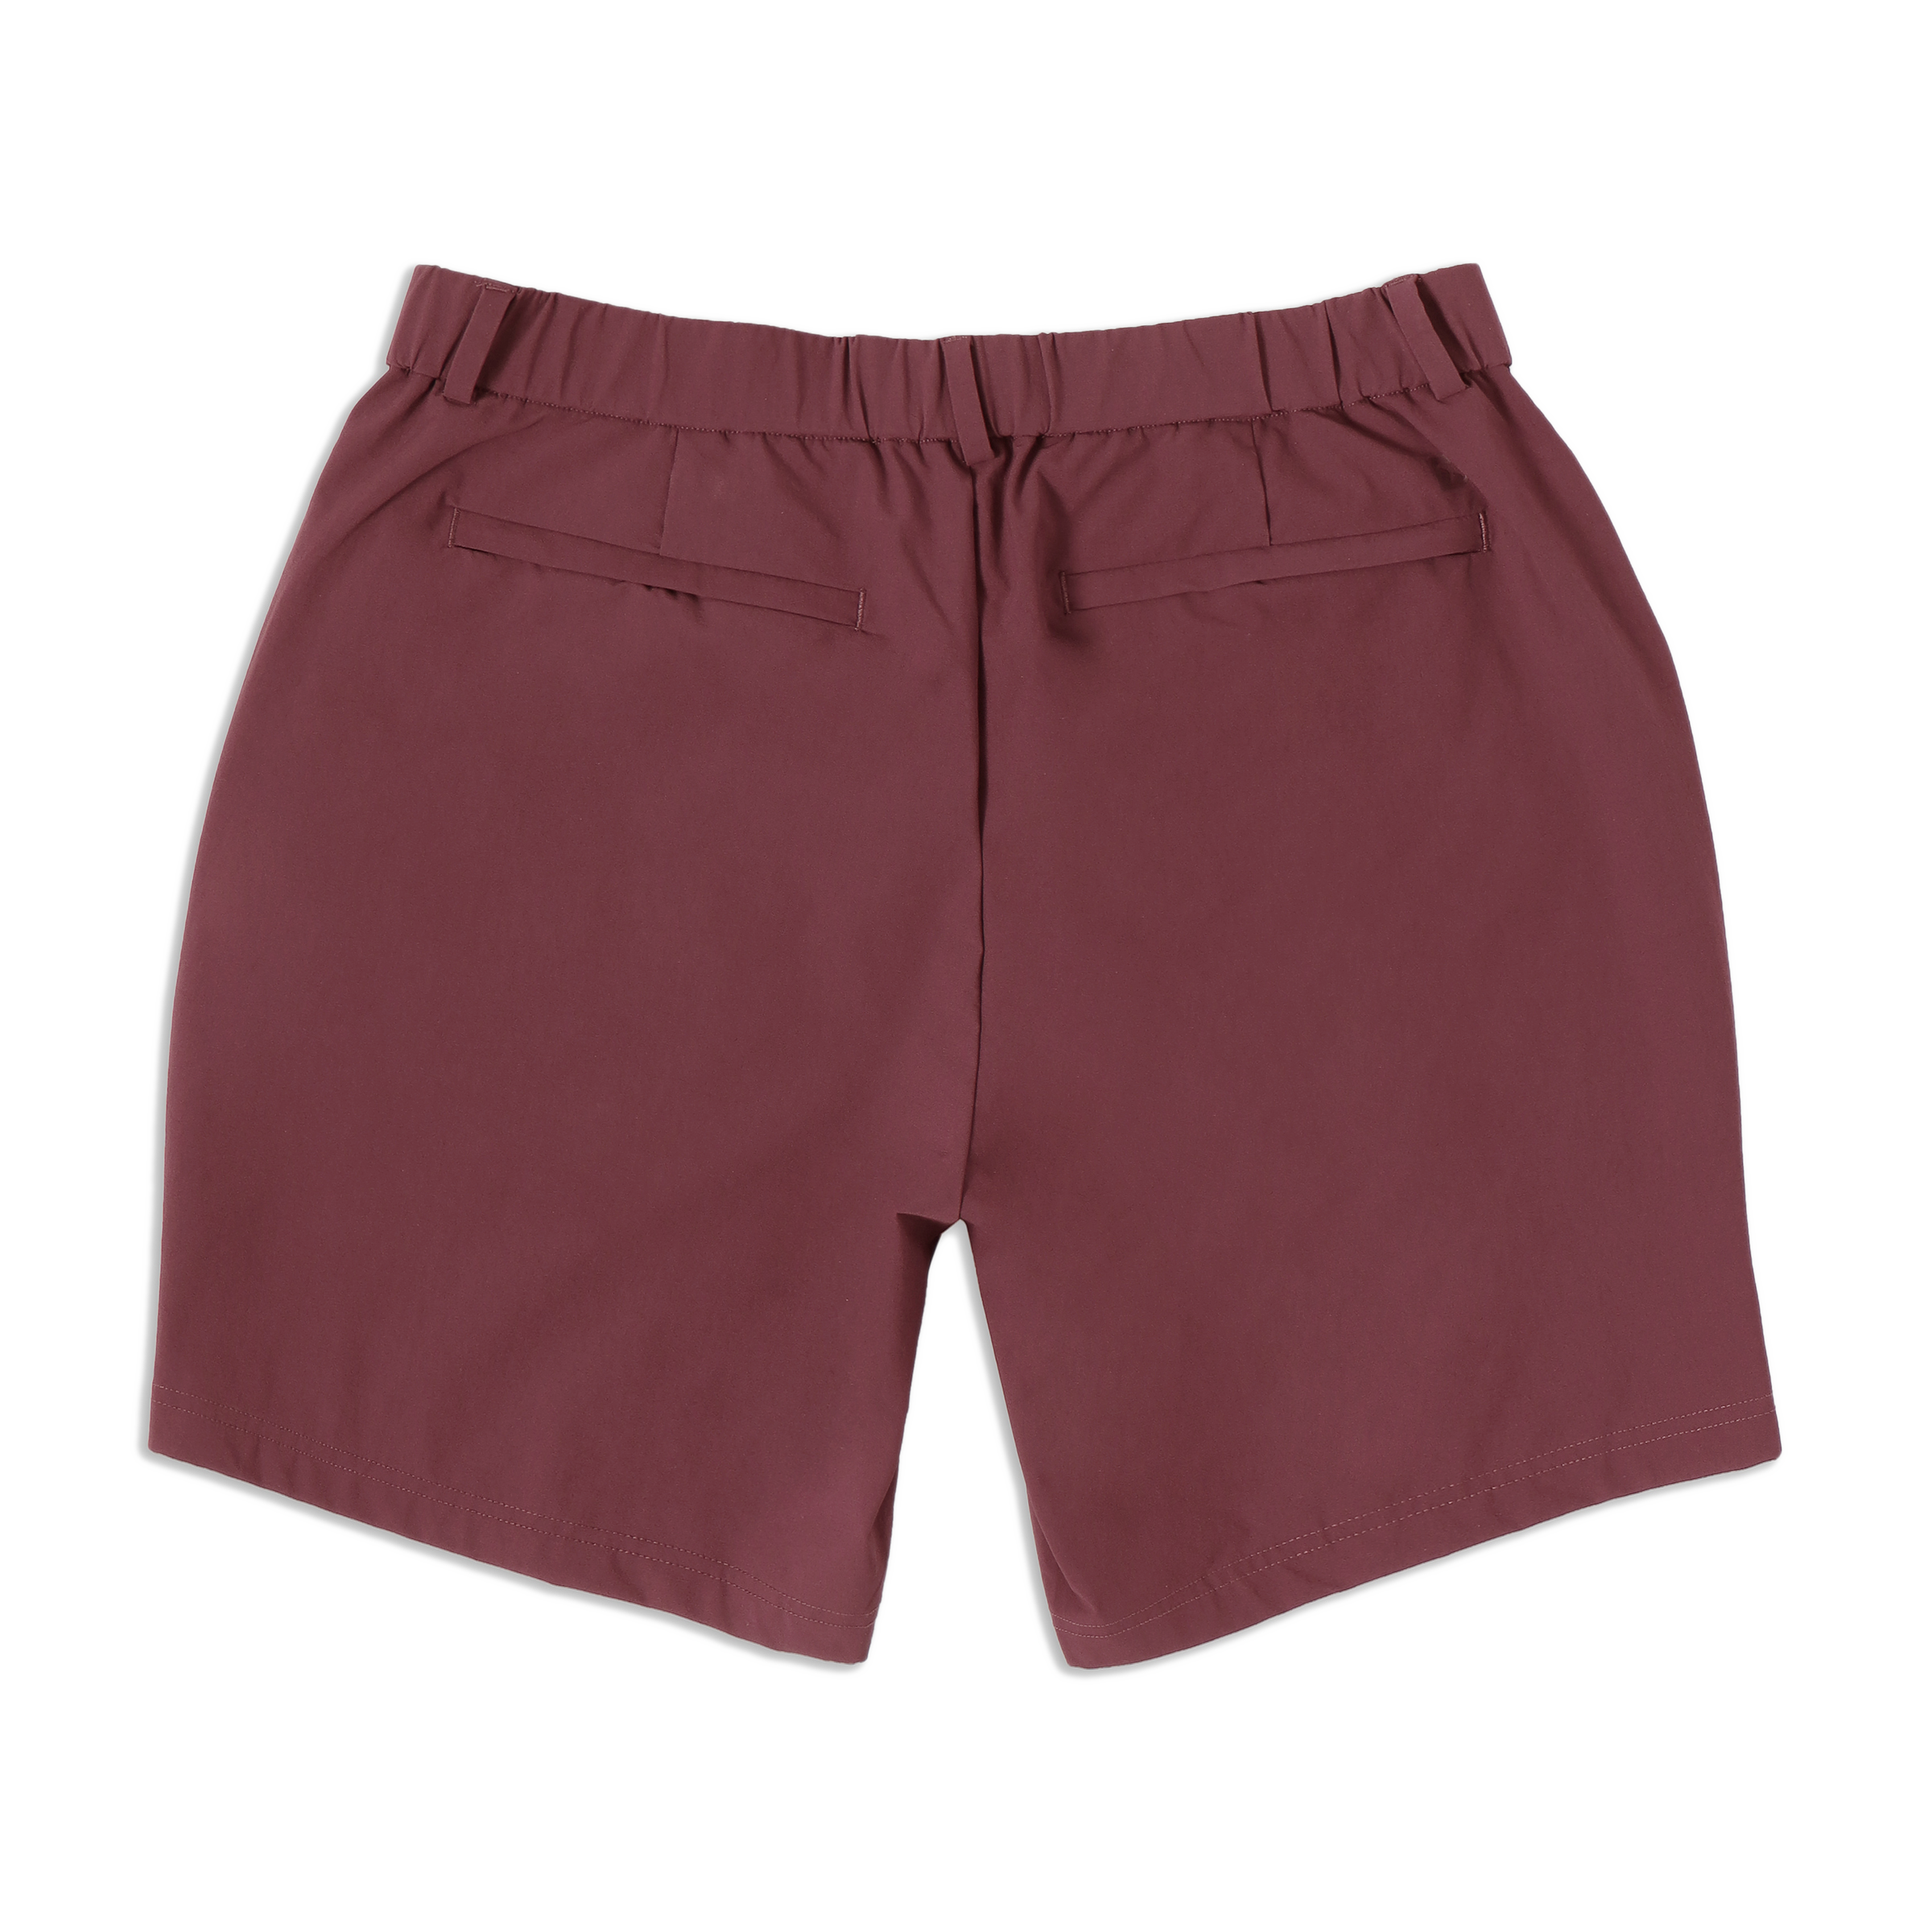 Tour Short 7" Wine back with flat elastic waistband, belt loops, and two hidden zipper back pockets